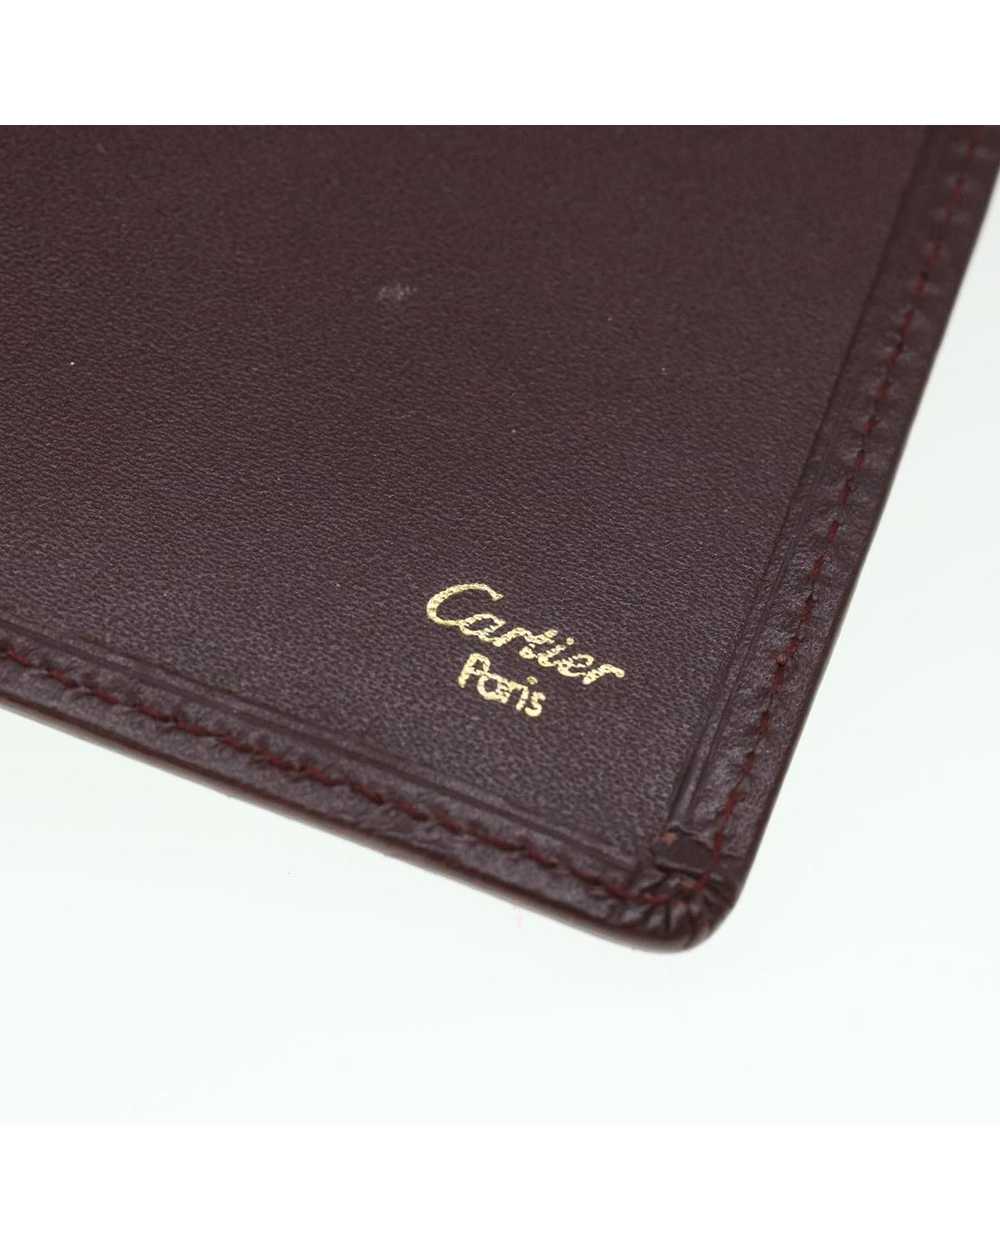 Cartier Leather Card Case in Wine Red - image 8